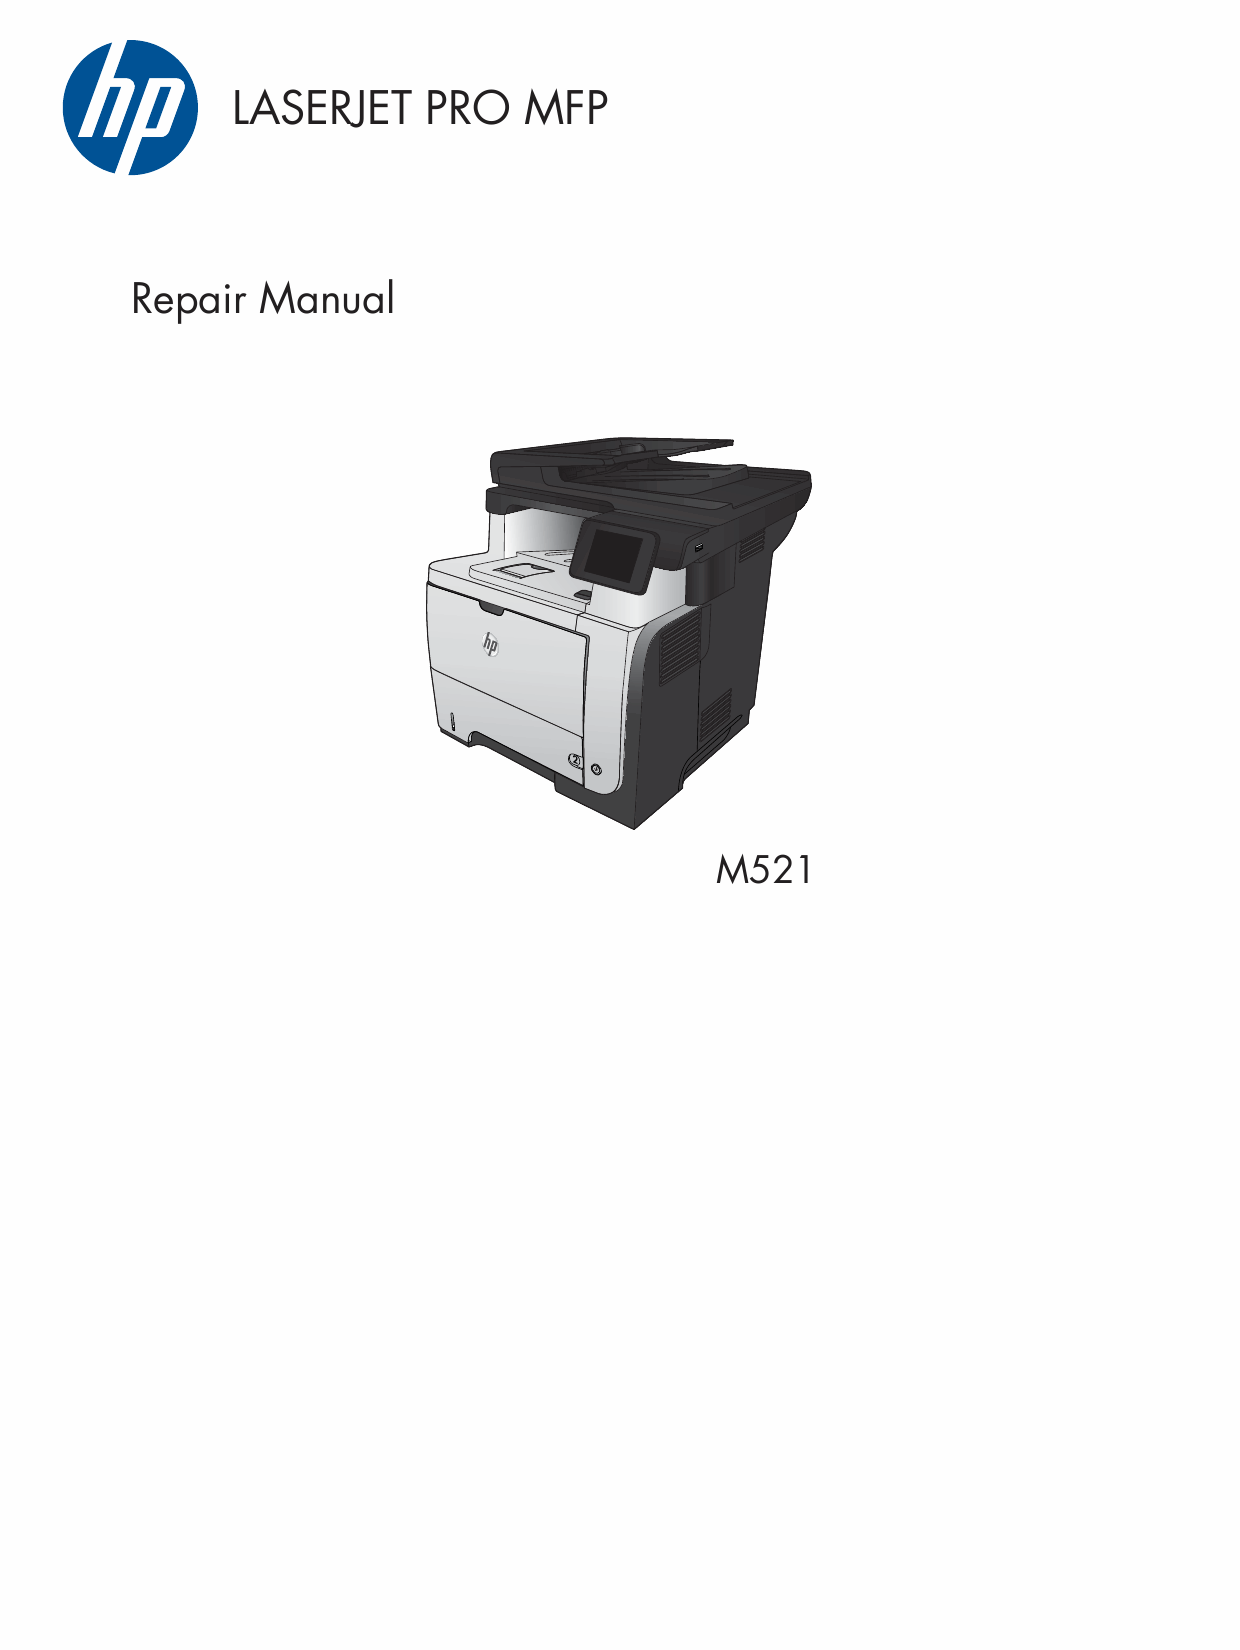 HP LaserJet Pro-MFP M521 dn dw Parts and Repair Guide PDF download-1